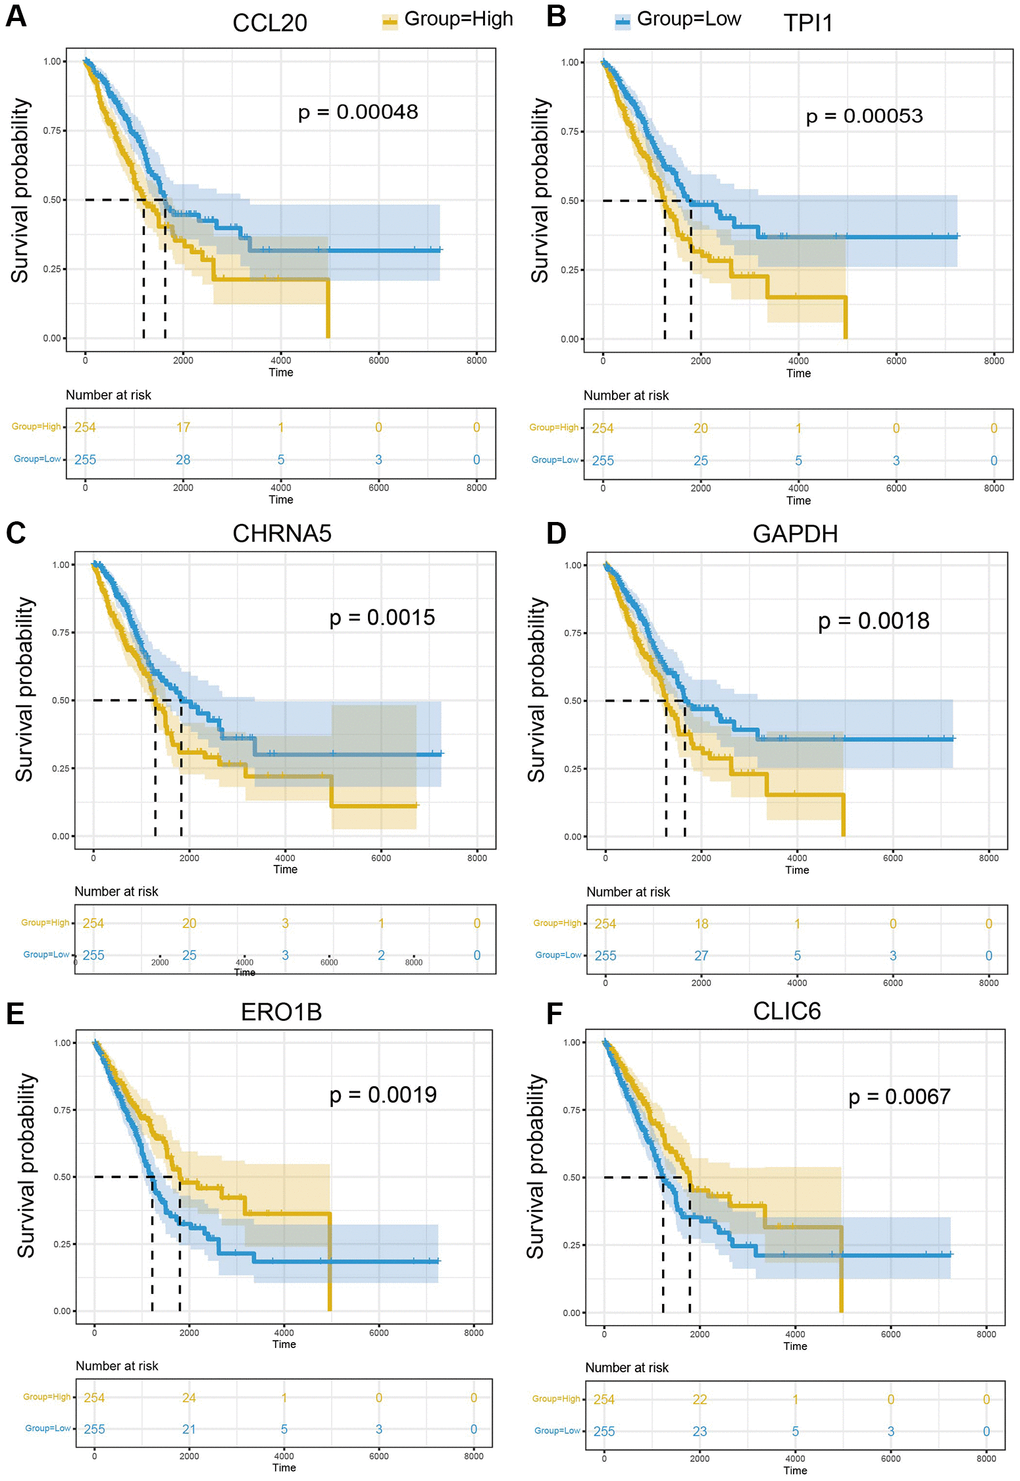 The prognostic significance of marker genes in LUAD. Kaplan-Meier survival curves of (A) CCL20, (B) TPI1, (C) CHRNA5, (D) GAPDH, (E) ERO1B, (F) CLIC6 in LUAD. The median of gene expression is utilized as the cut-off. Yellow: higher expression of indicated gene; Blue: lower expression of indicated gene.